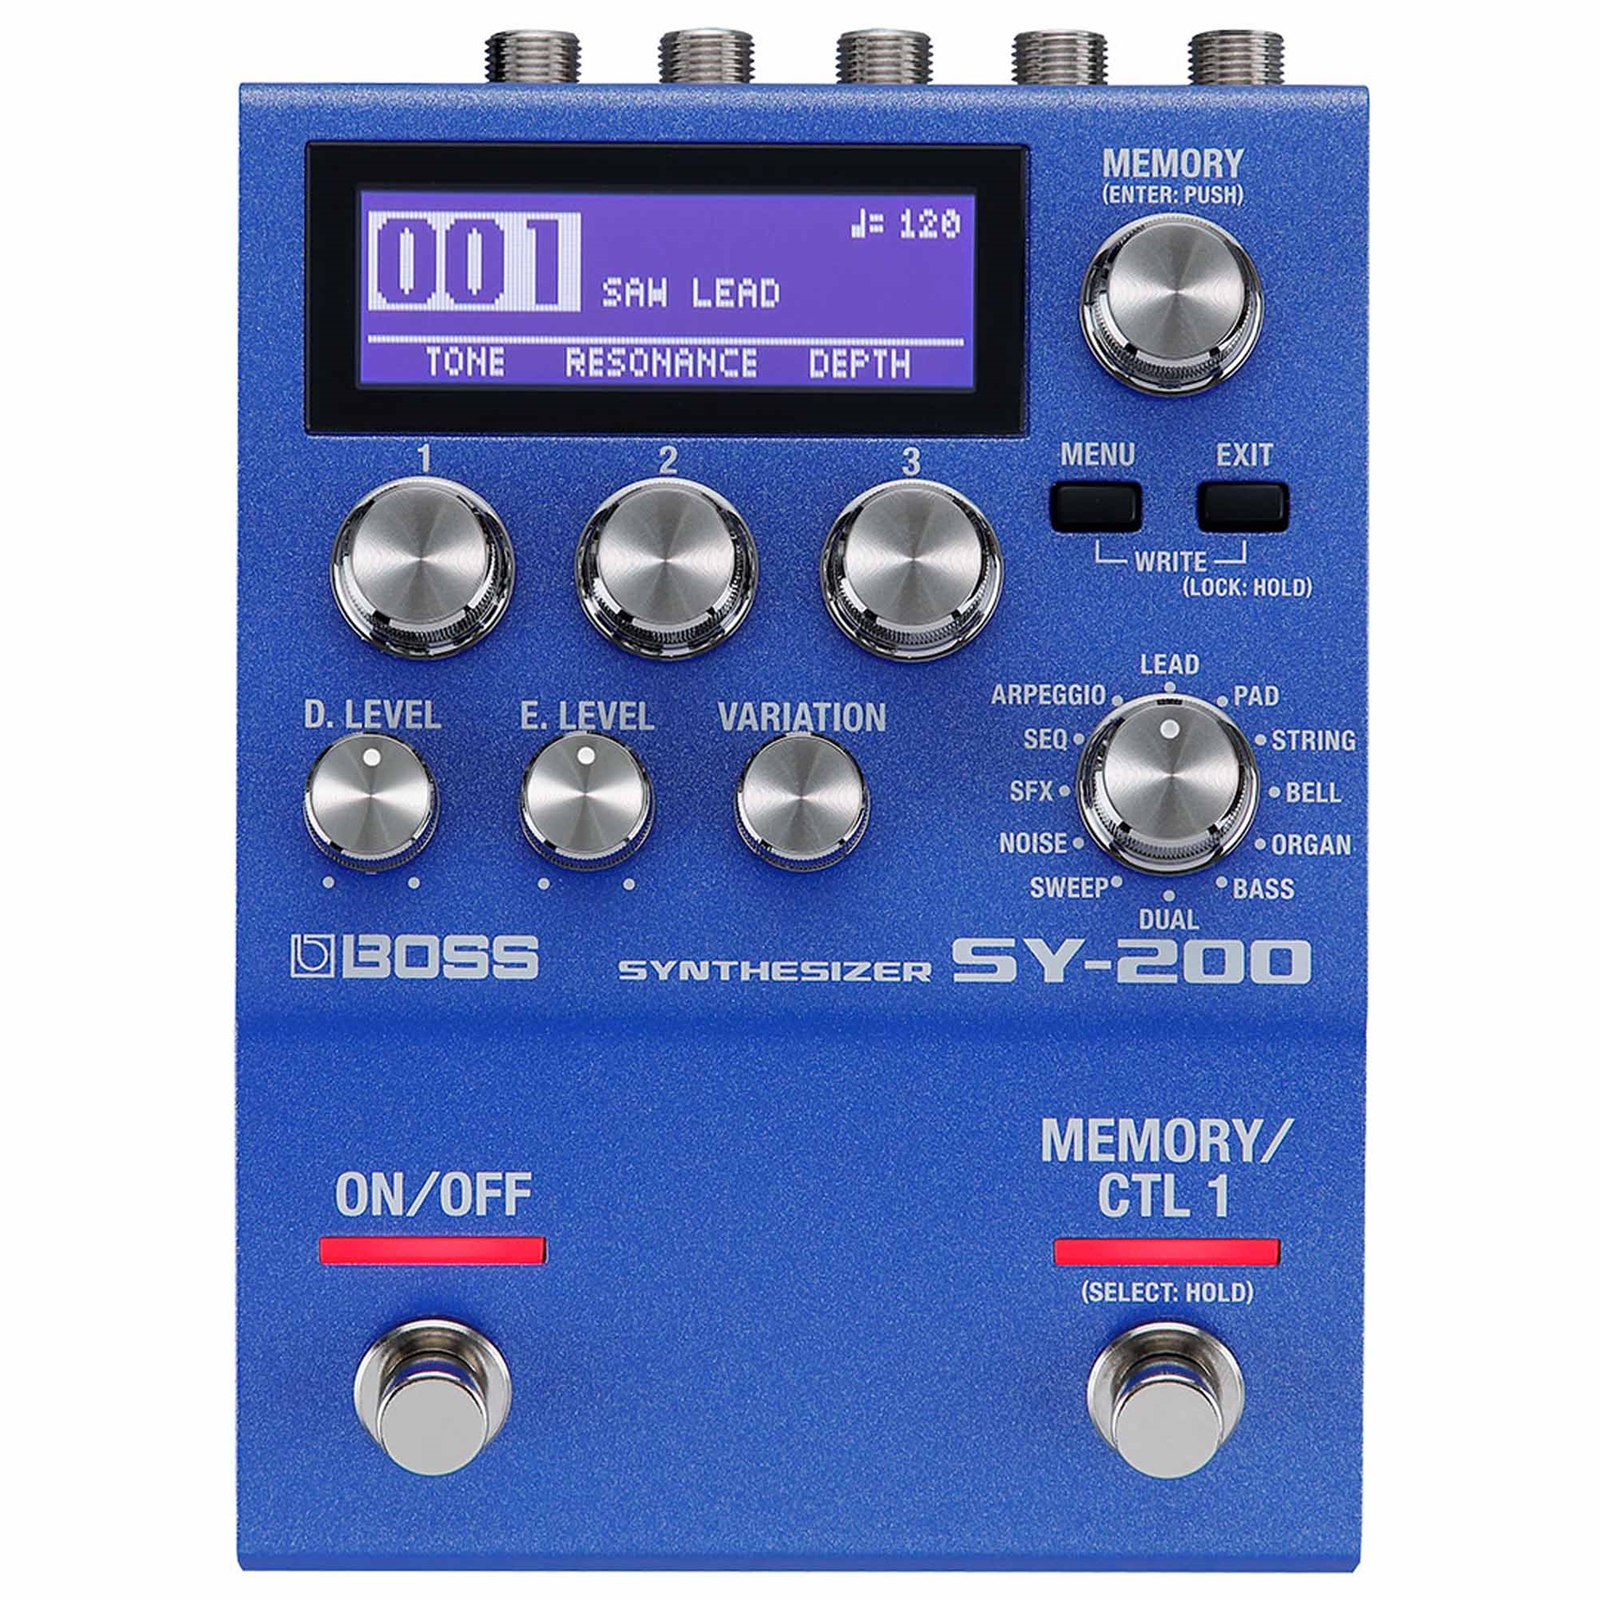 BOSS SY-200 Synthesizer Pedal